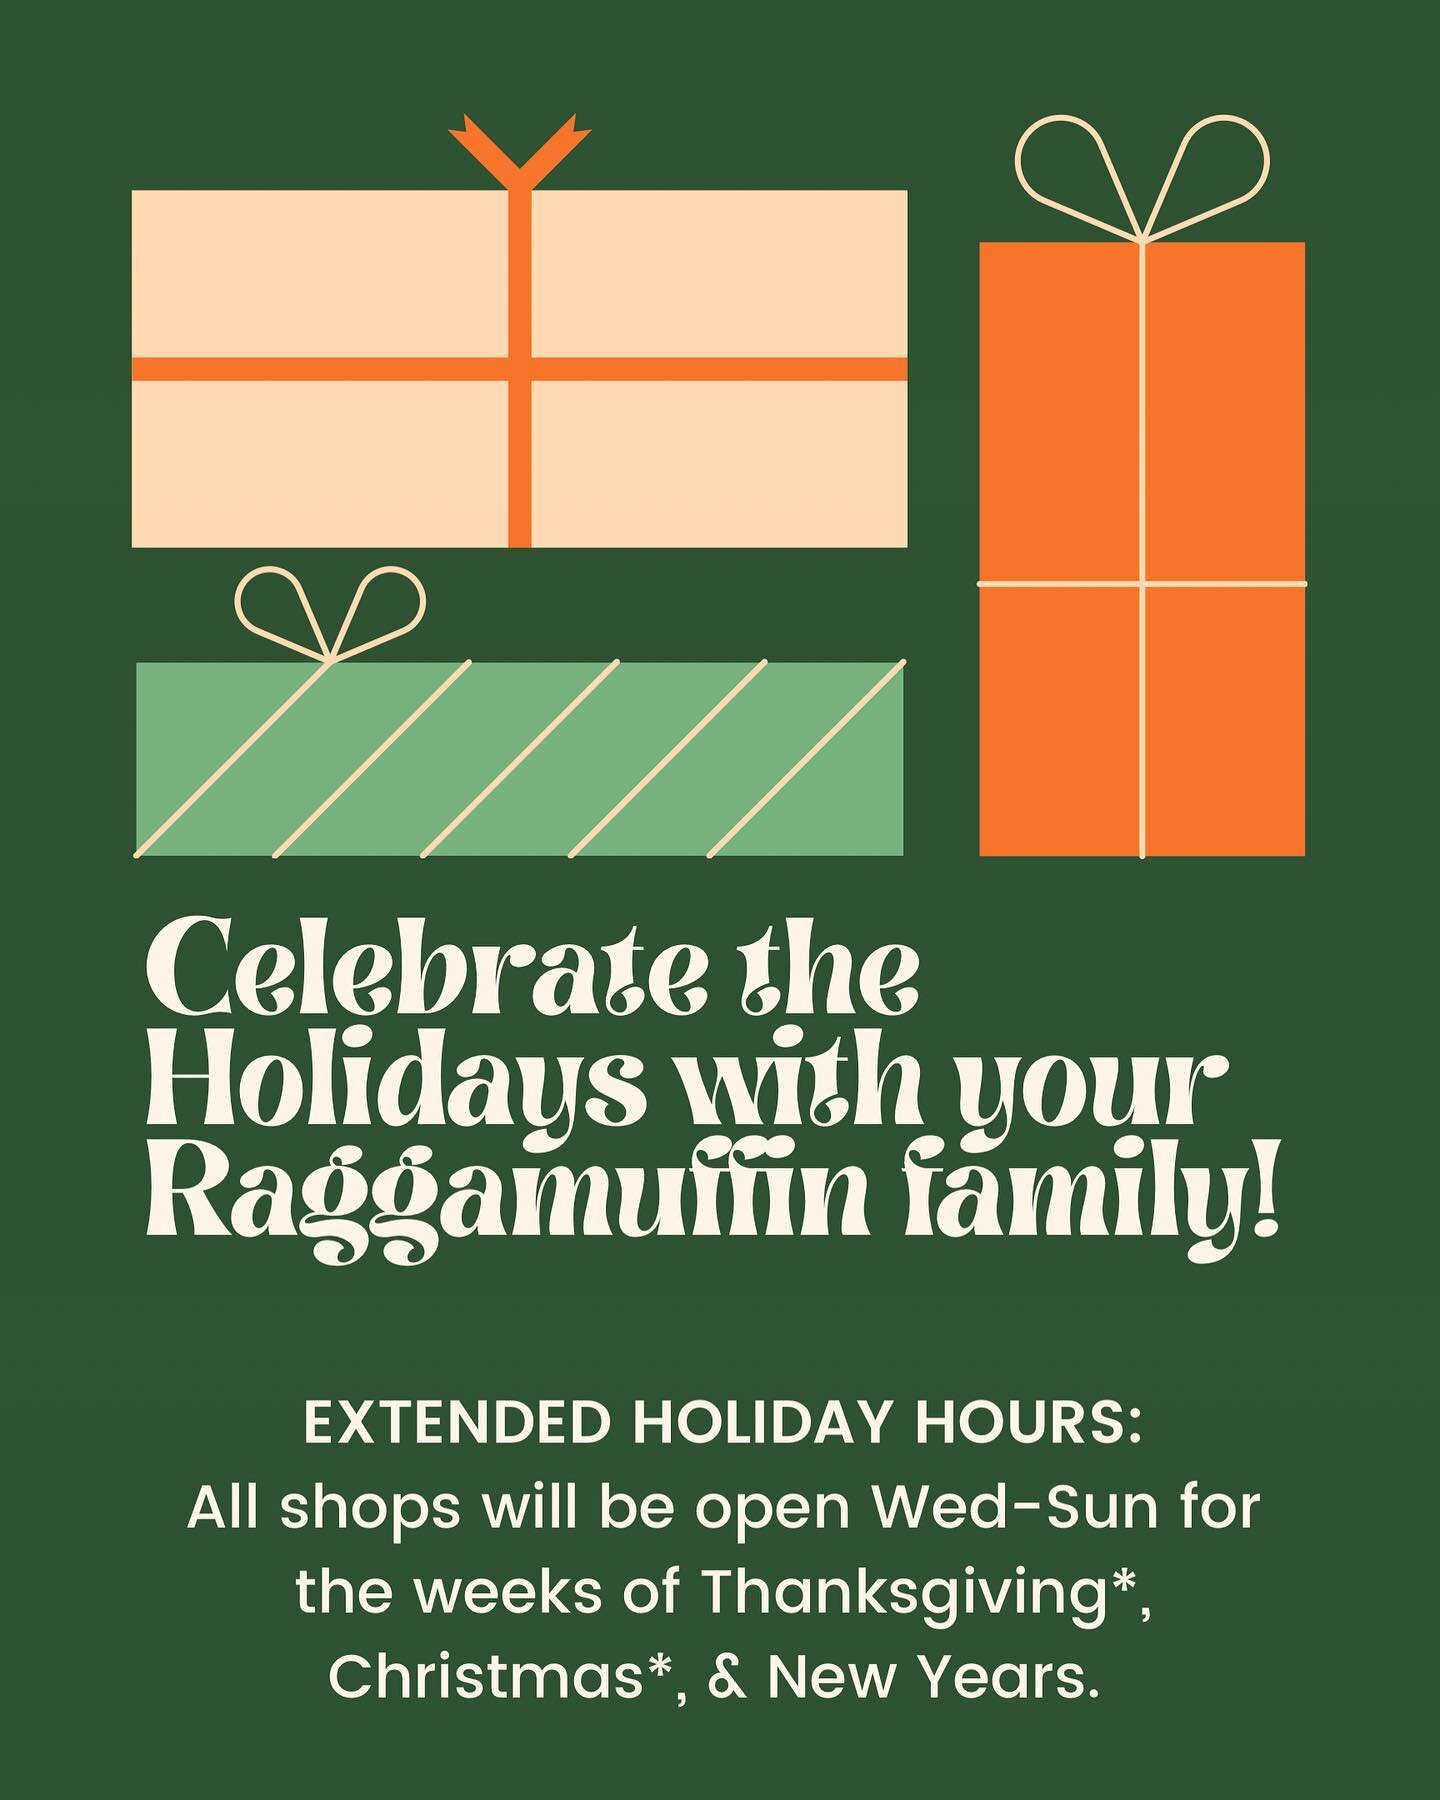 Bring your family &amp; friends to share in a little extra joy this holiday season! 

We&rsquo;re joined by @peaceandcreamshop &amp; @raggamuffinsurf pop-up shop all week long!

Pop-Up Shop: 8am - 3pm
Peace &amp; Cream: 11am - 3pm

*All shops closed 